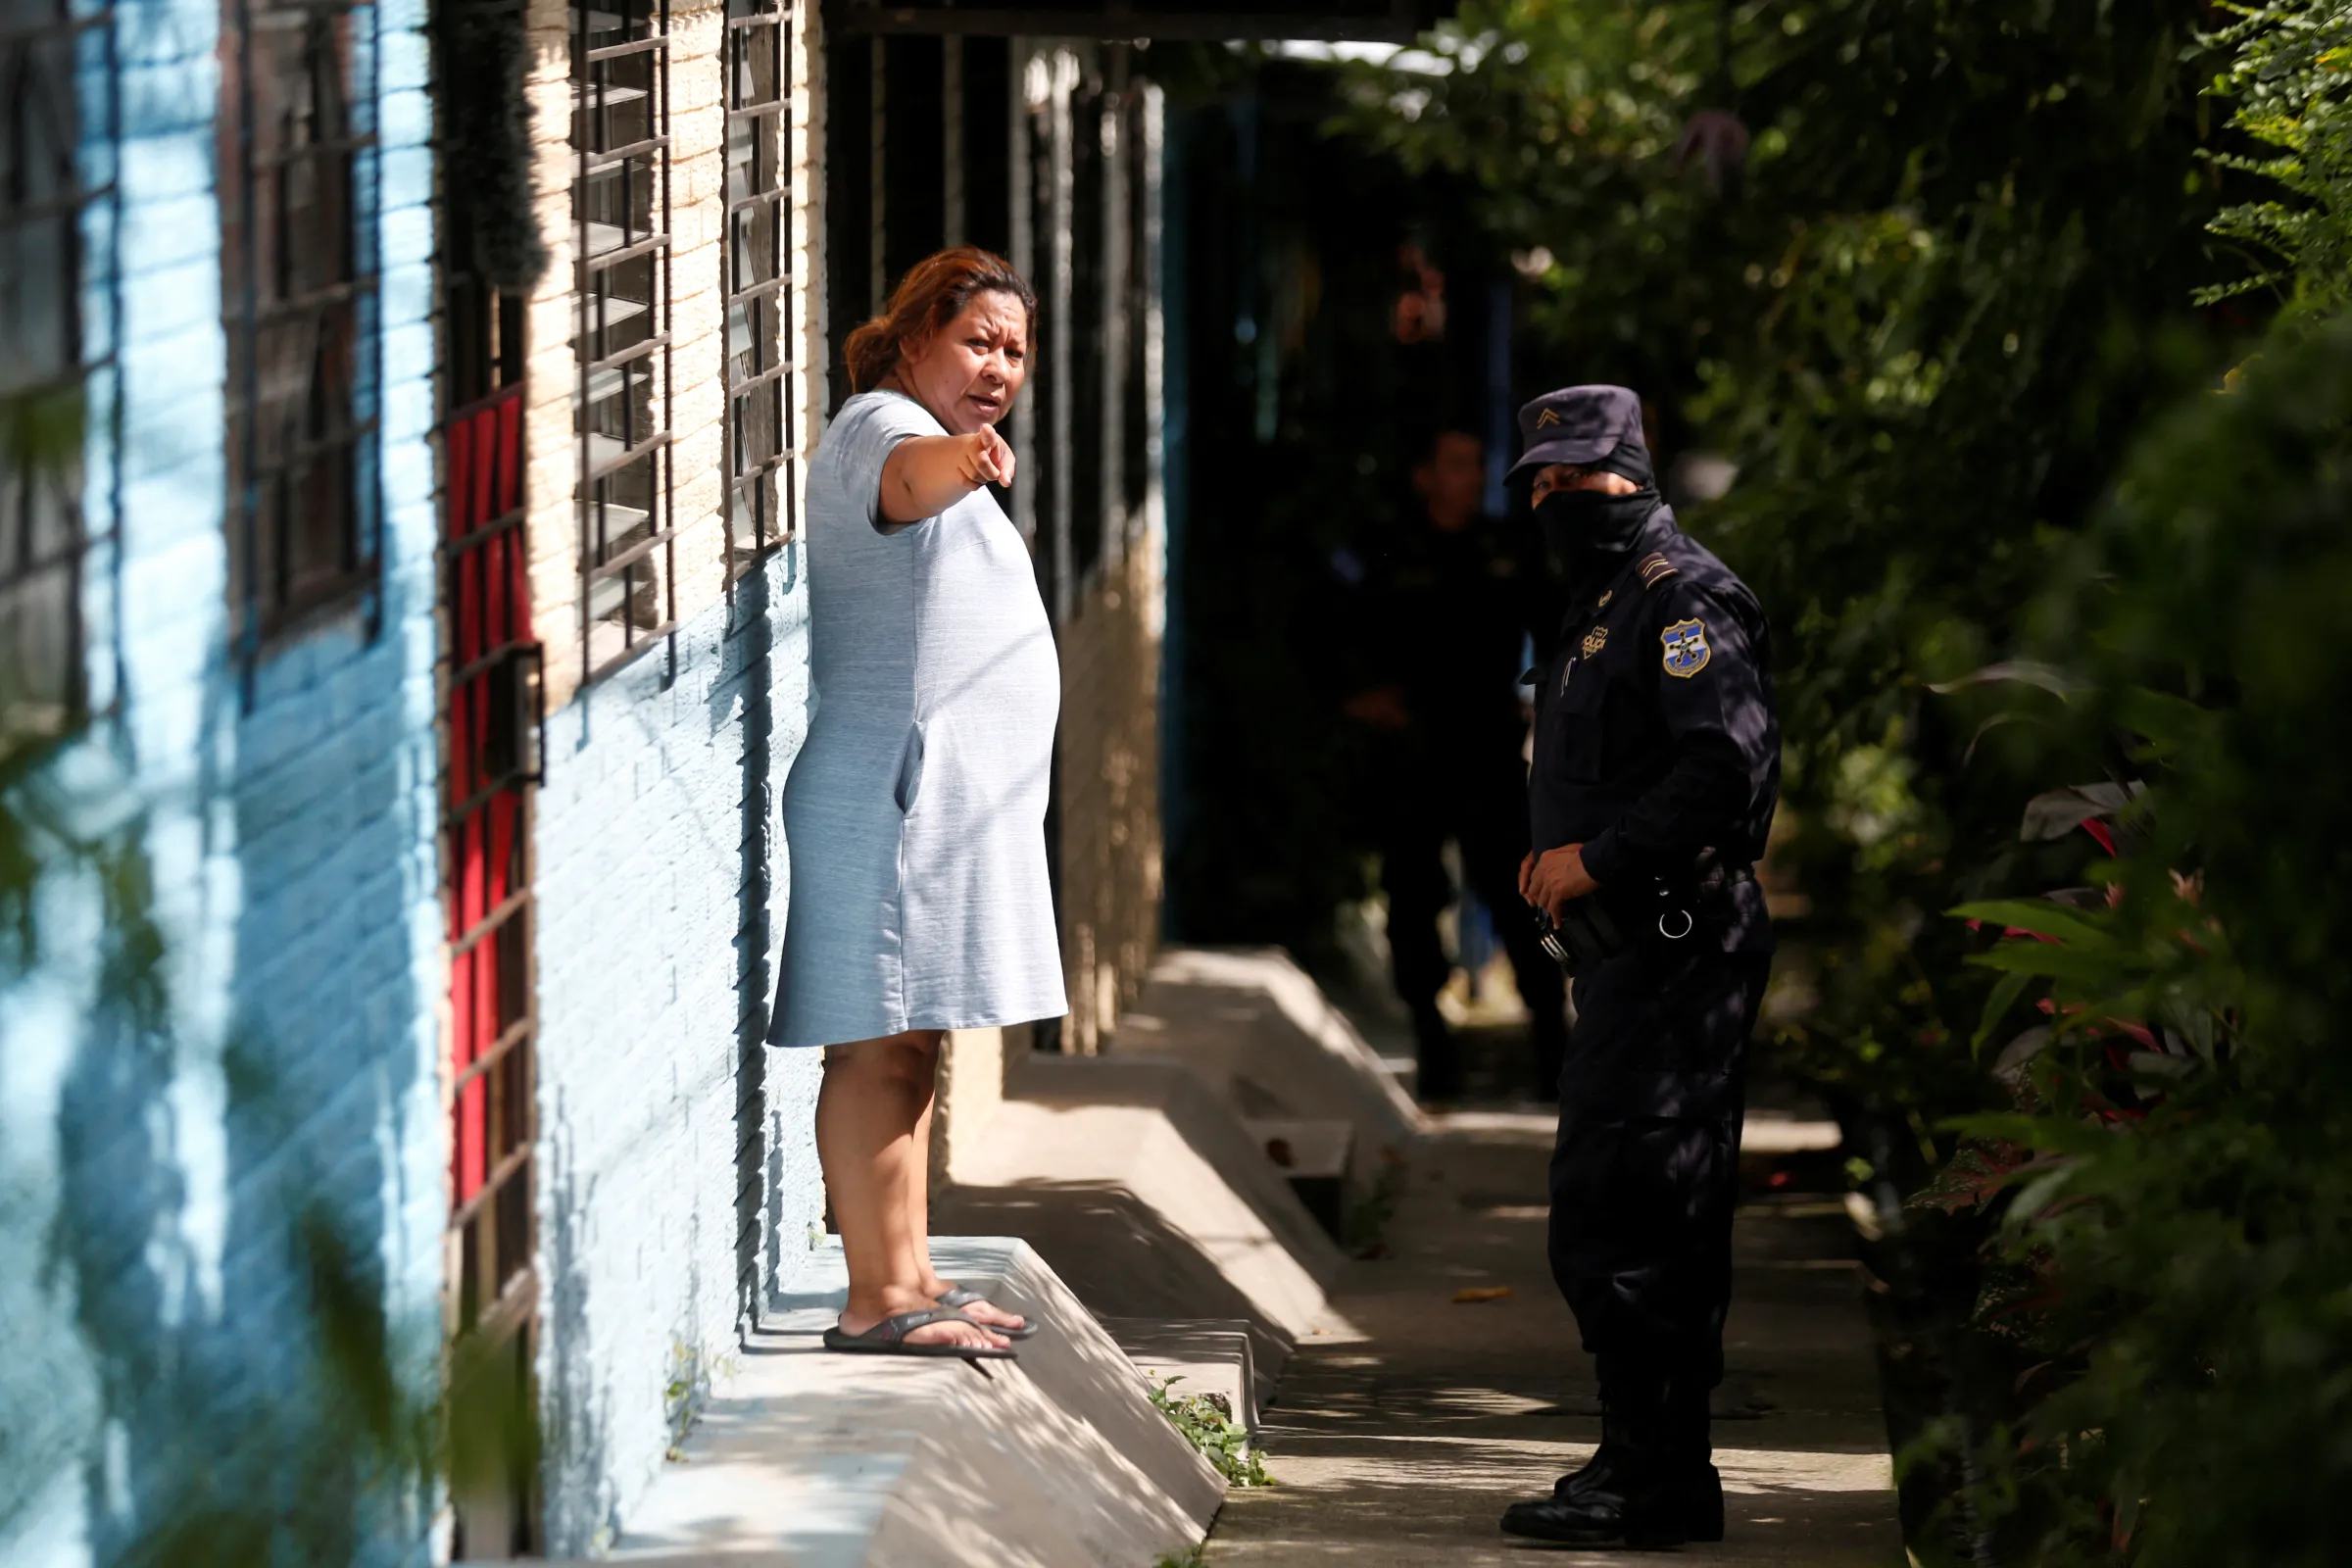 Police officer talks with a woman during a 'Casa Segura' (Safe House) operation as part of the state of emergency to fight gangs